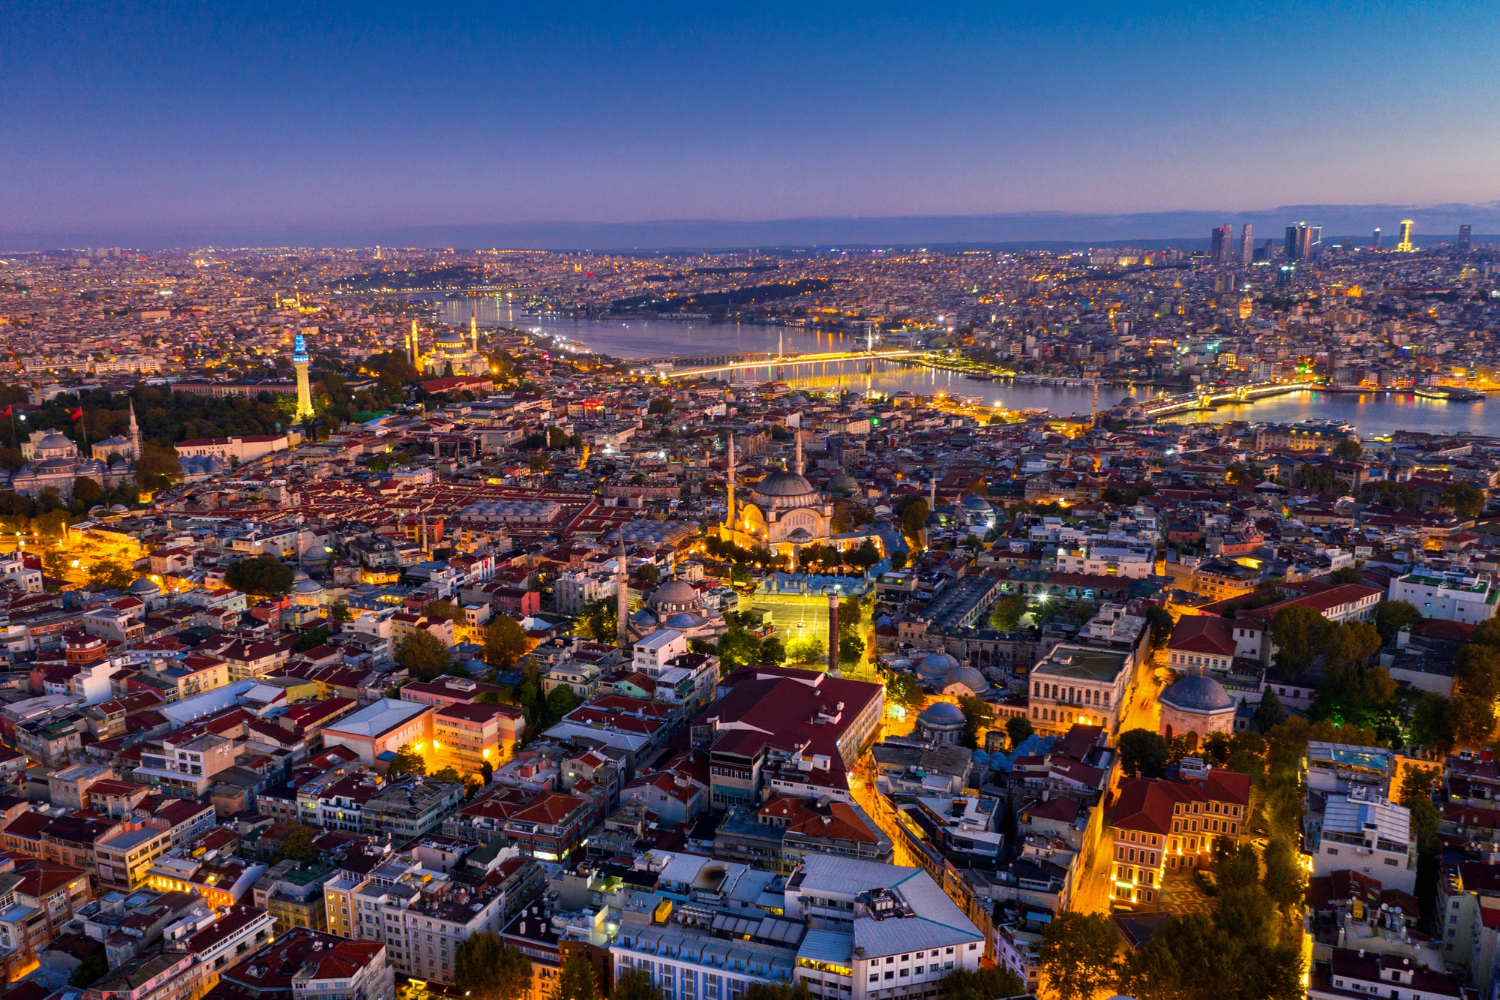 FOOD AND DRINK AND DIVERSITY IN ISTANBUL, THE MEETING POINT OF CULTURES